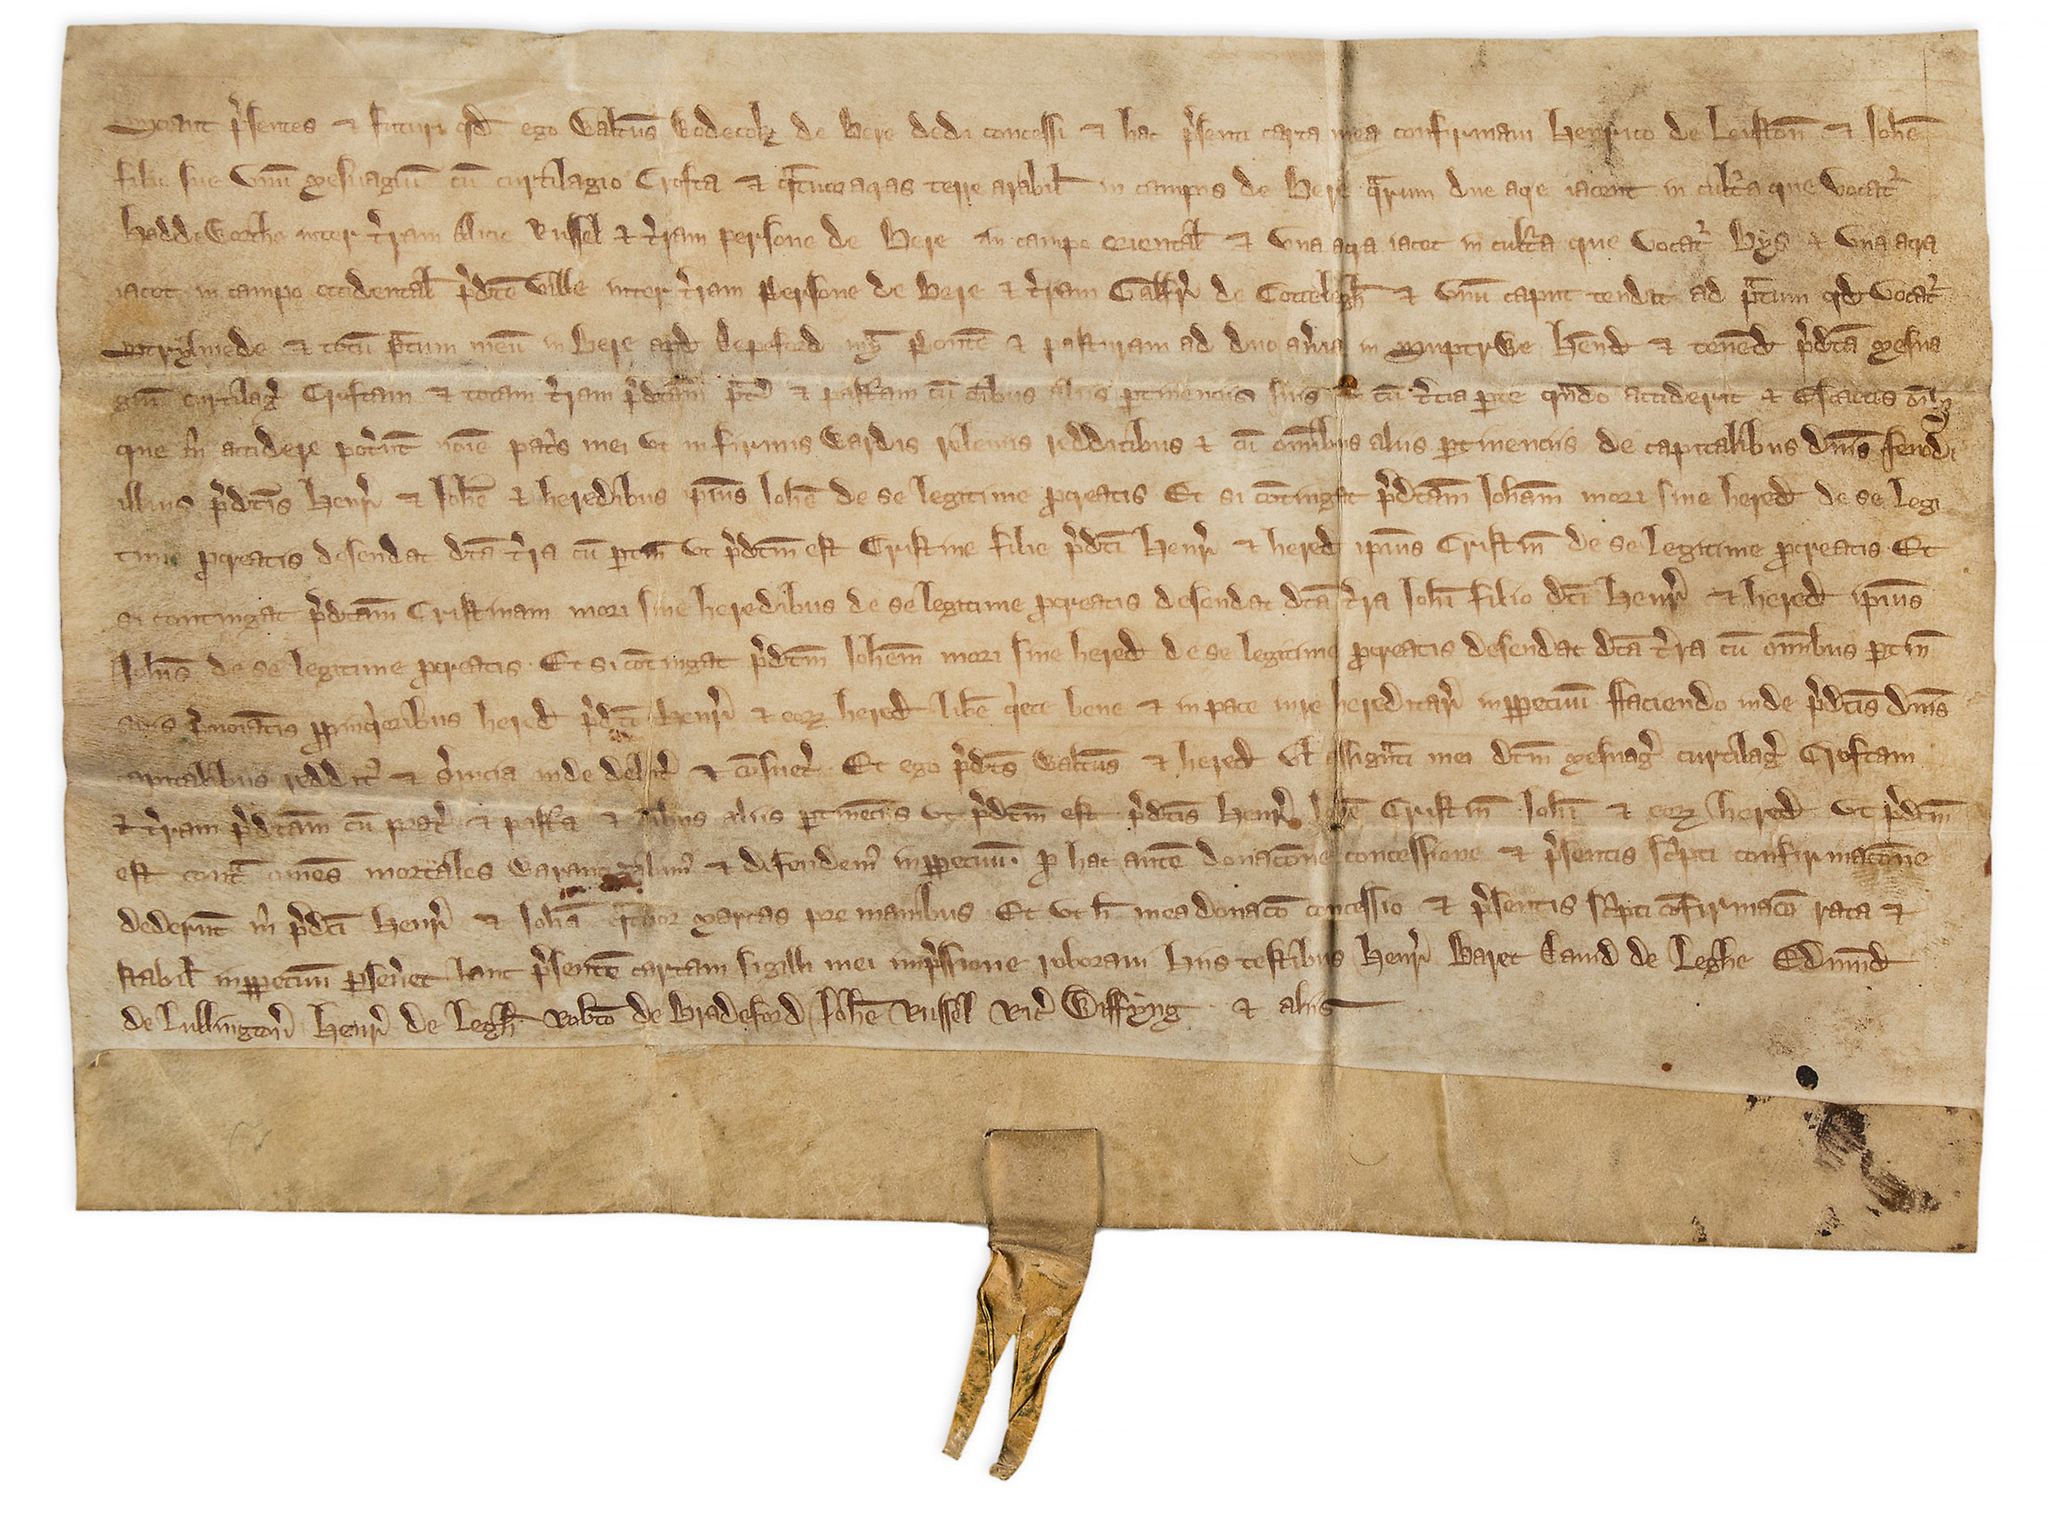 Medieval Devon.- - Charter of enfeoffment by Walter Wodecock [Woodcock] of Bere...  Charter of